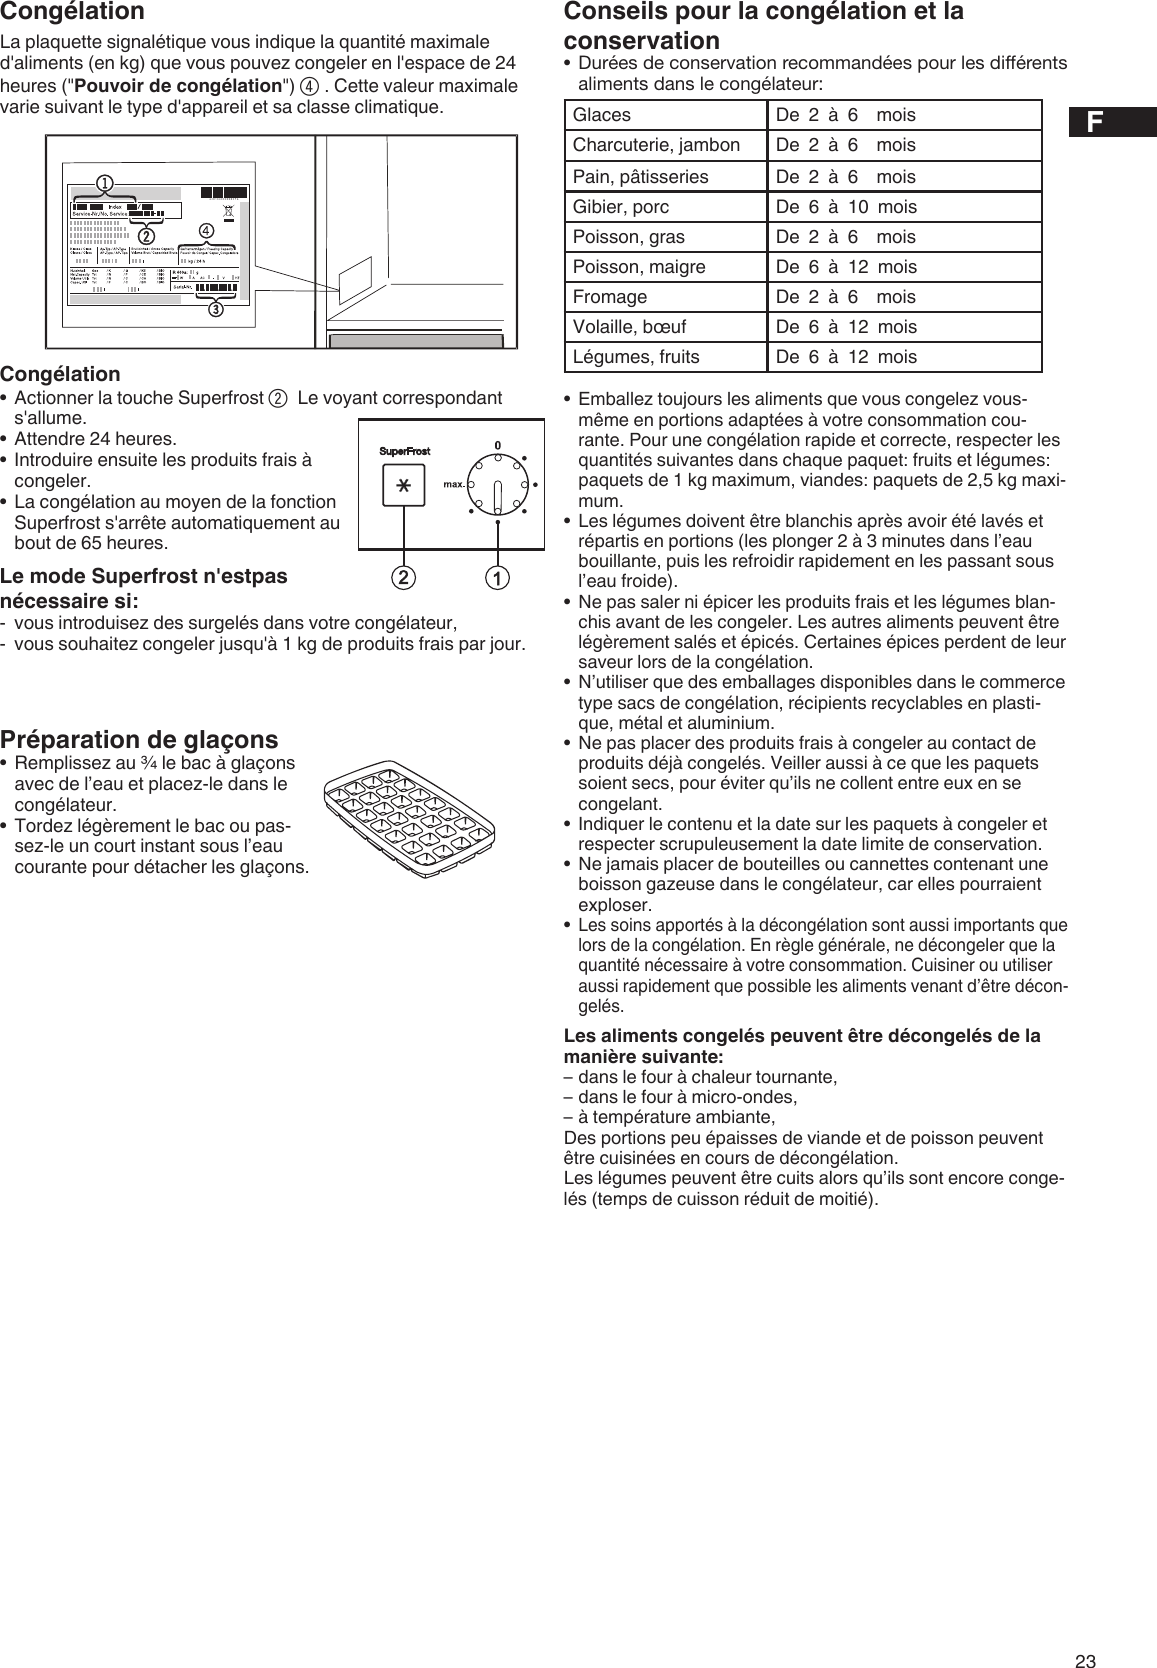 Page 5 of 7 - Liebherr Liebherr-Combined-Refrigerator-Freezer-Nofrost-7081-885-01-Users-Manual-  Liebherr-combined-refrigerator-freezer-nofrost-7081-885-01-users-manual